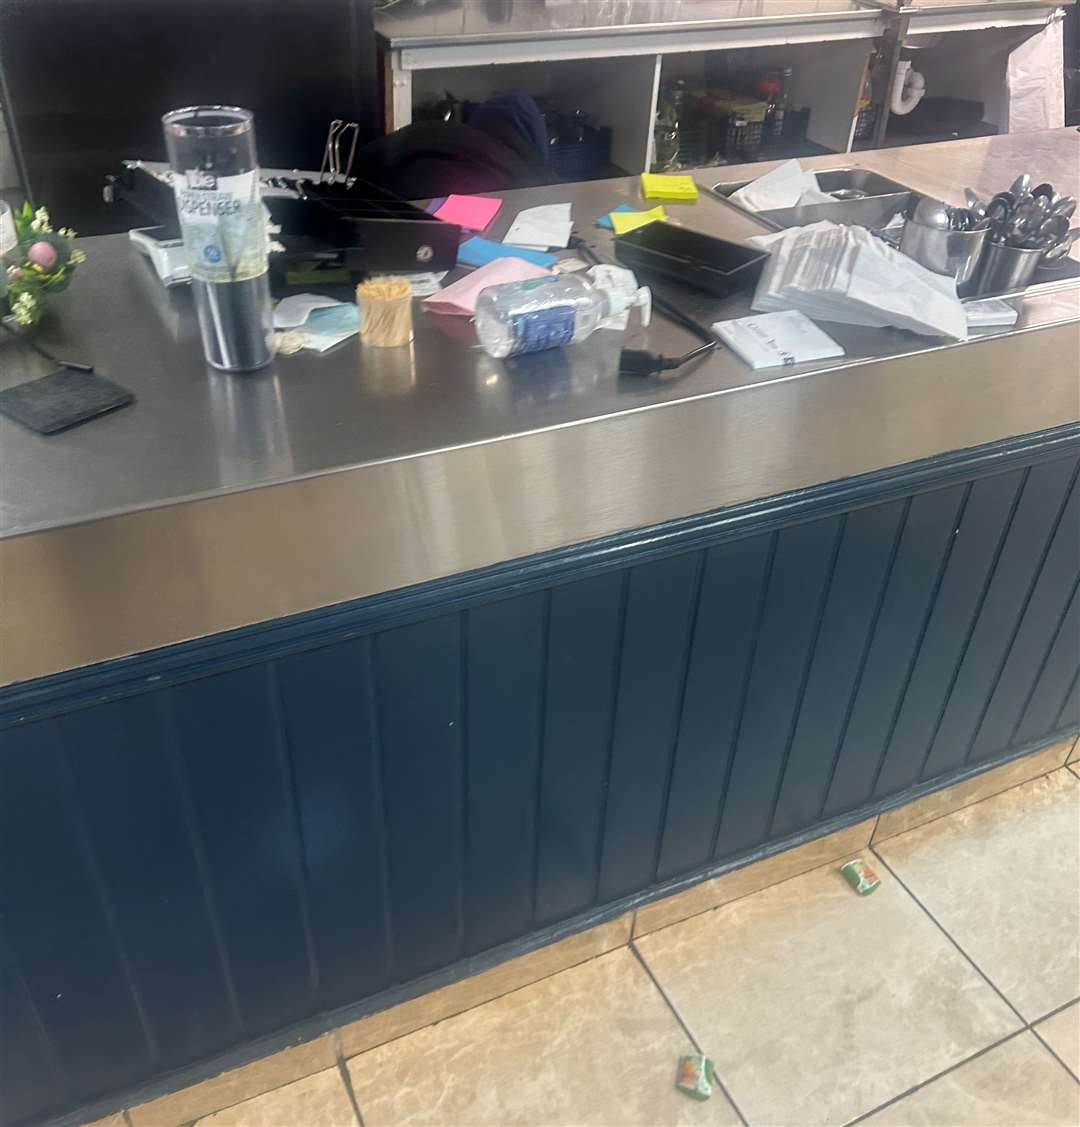 The till at The Gorge cafe was smashed during the break-in. It will now need to be replaced. Picture: Fahir Karaoglan